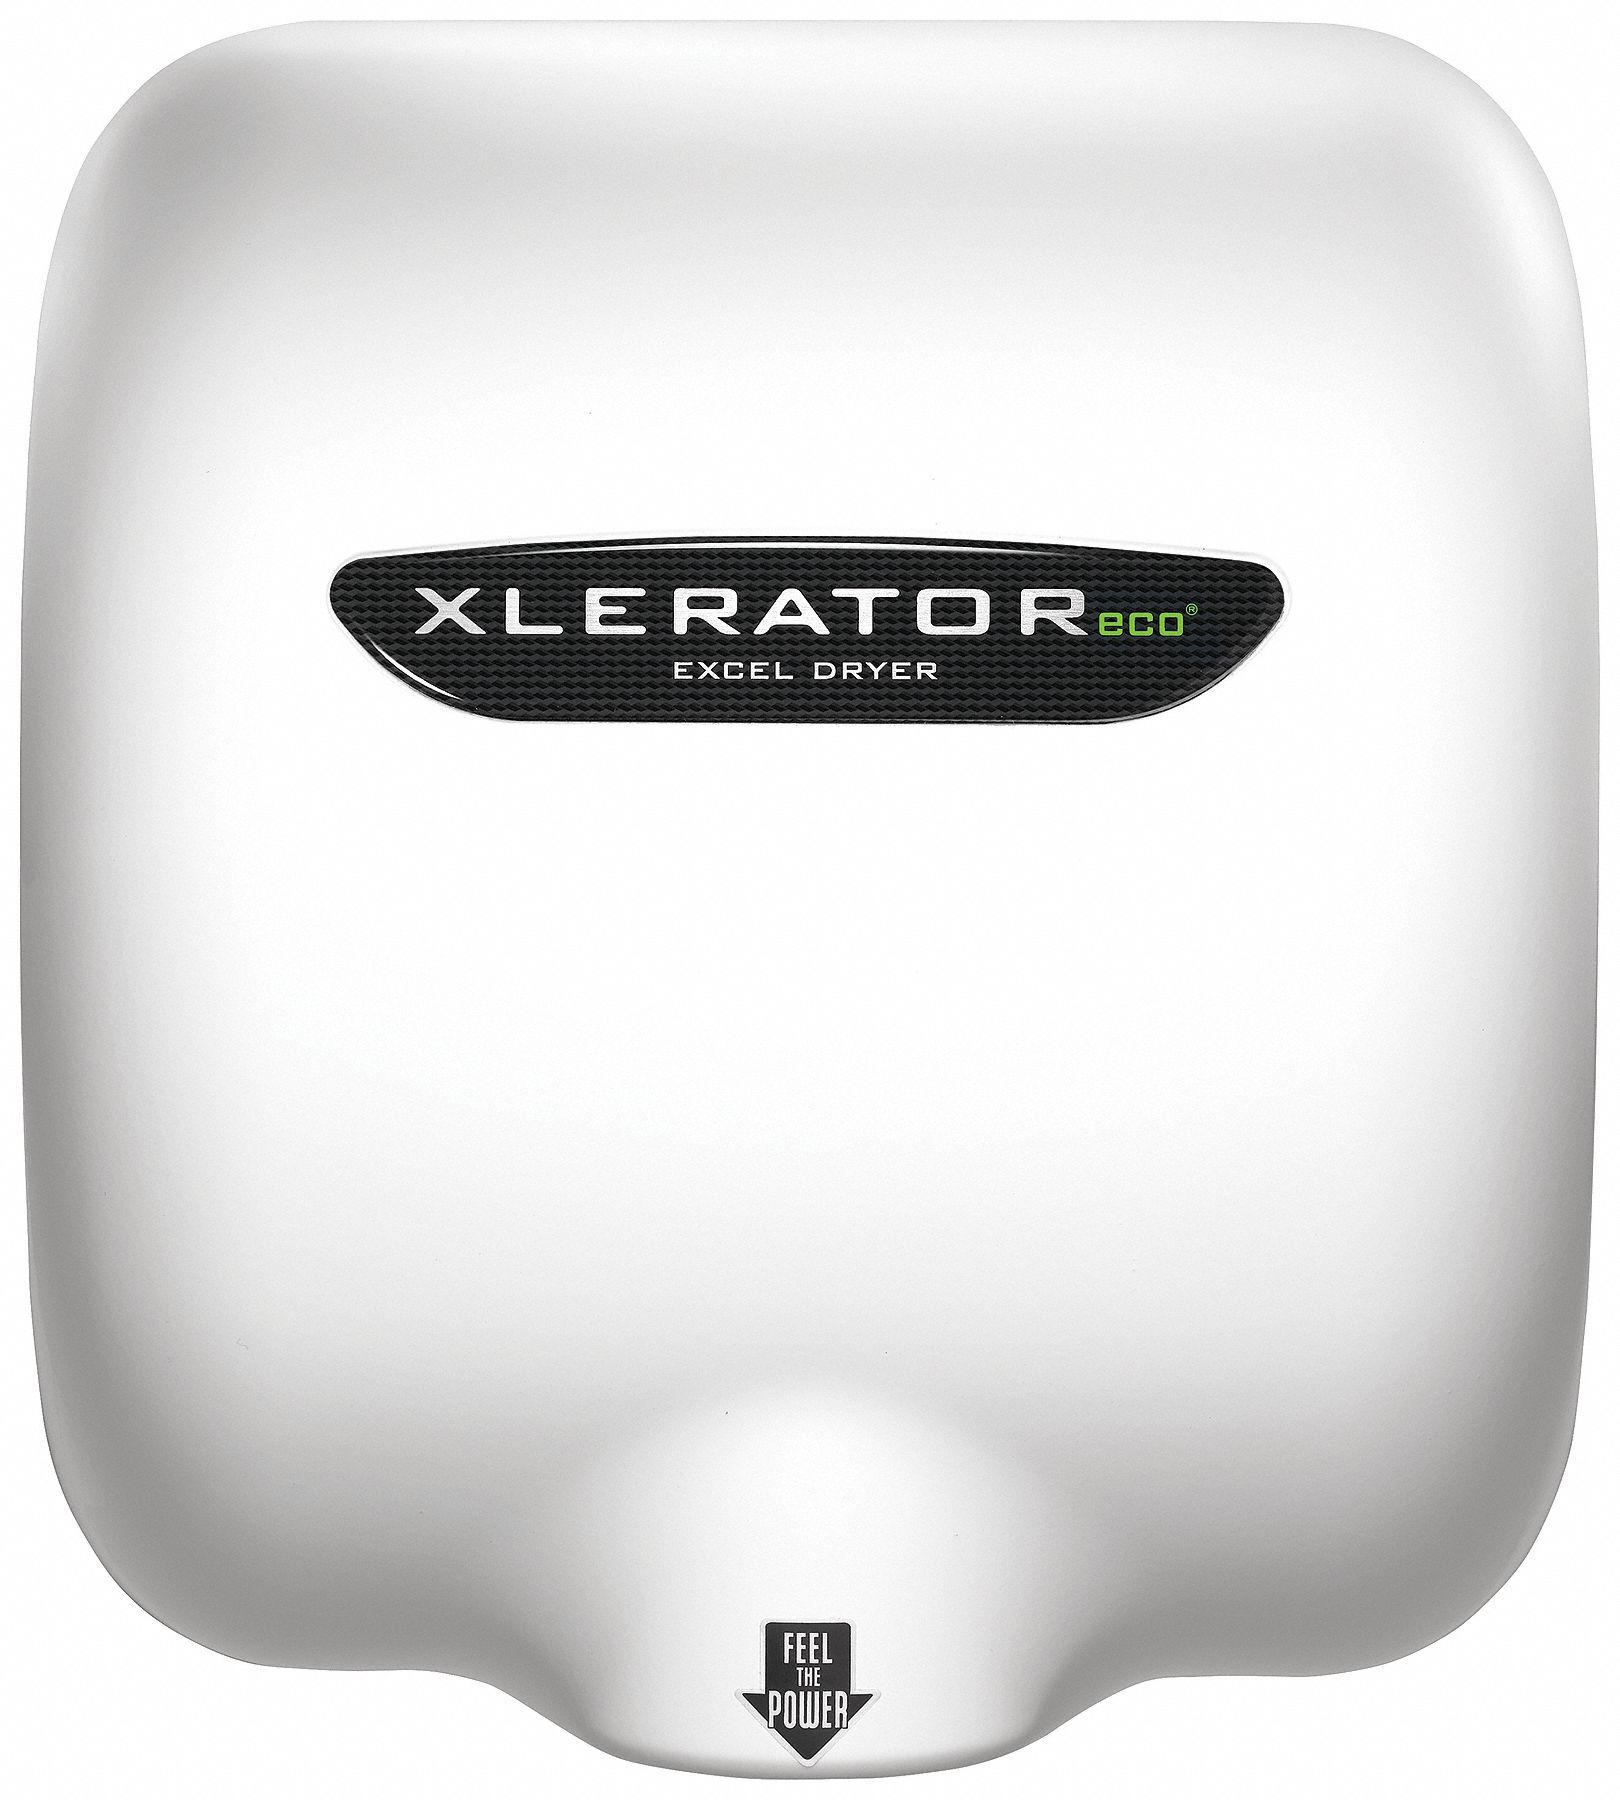 Hand Dryer: Integral, BMC, Auto, White, 10 sec Dry Time, 5.6/6.2 Amps, 208 to 277 Volt